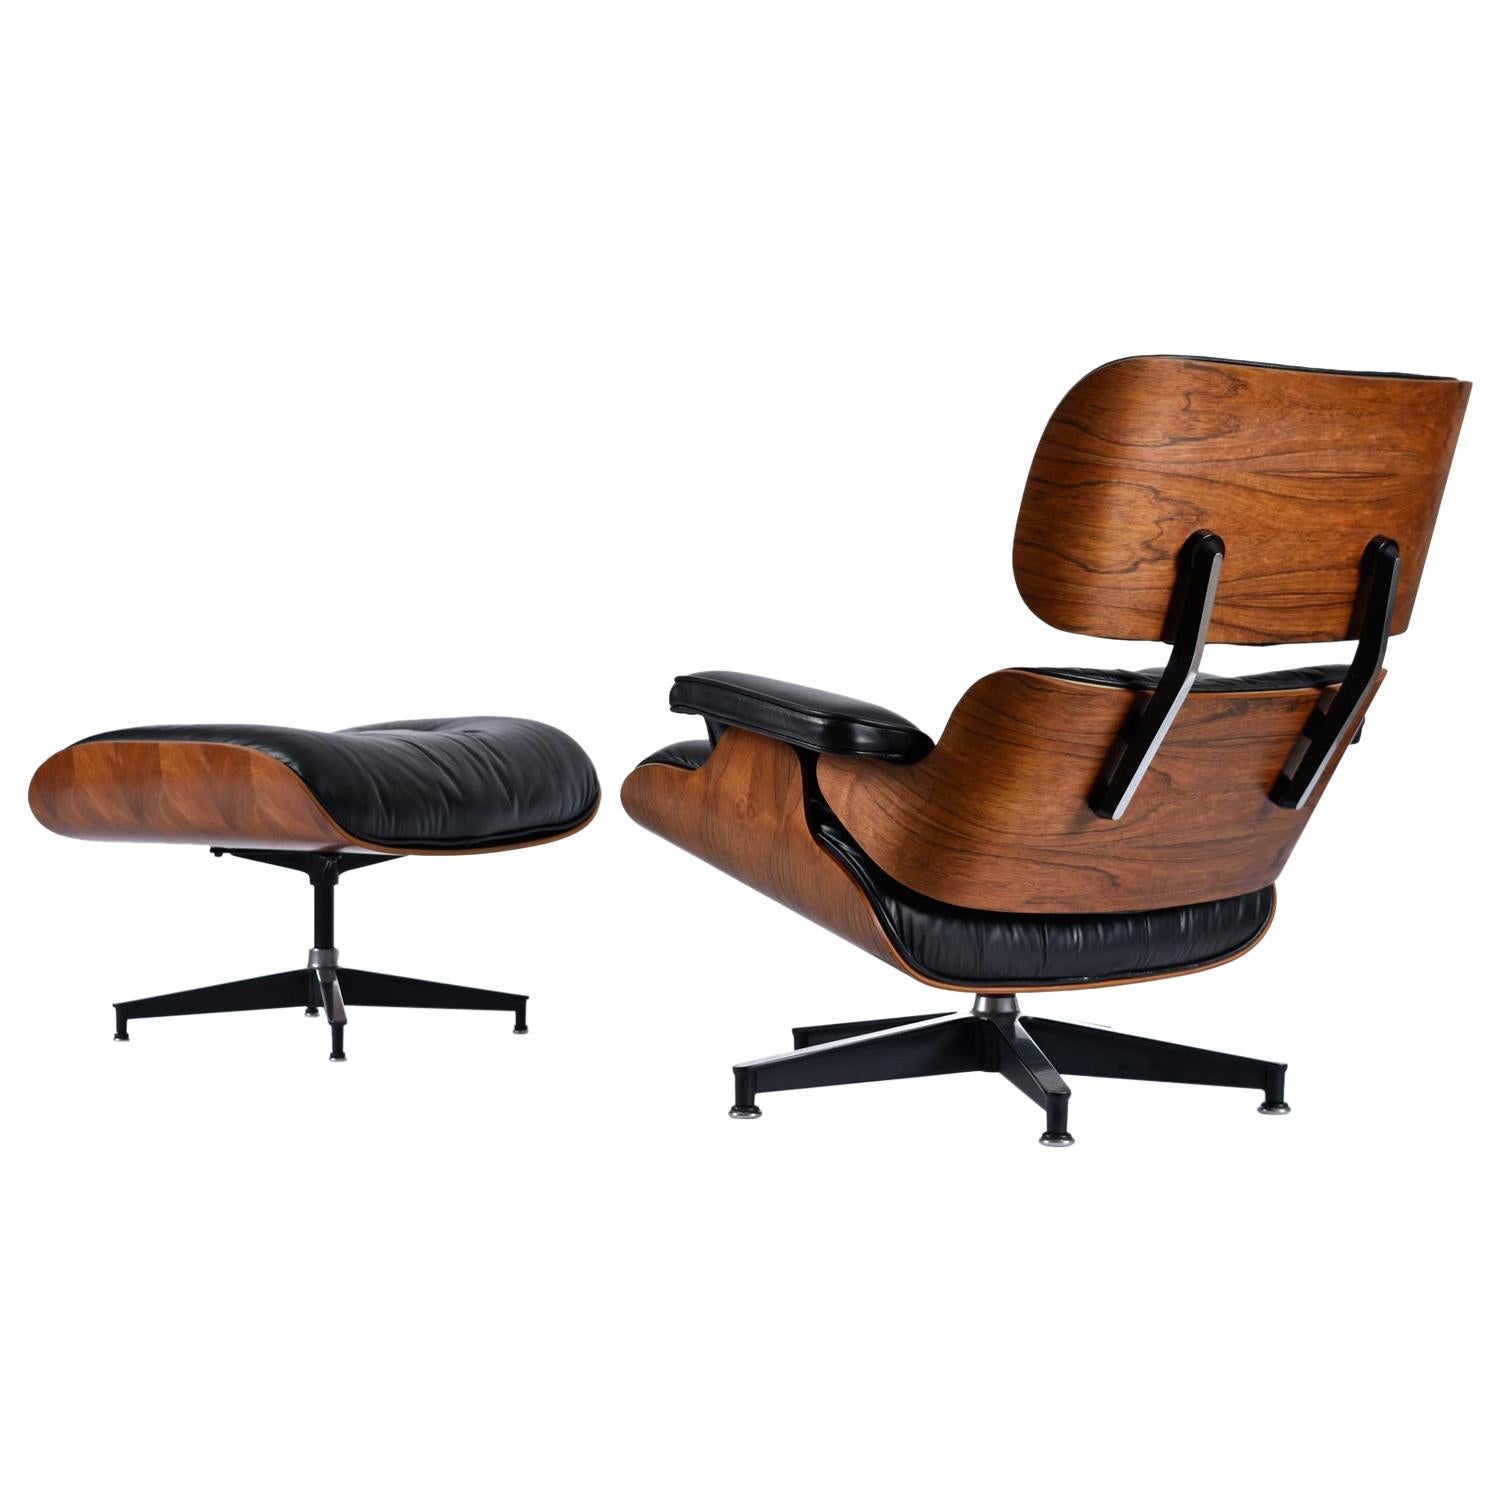 1977 Rosewood Eames Lounge Chair and Ottoman by Herman Miller in Black Leather